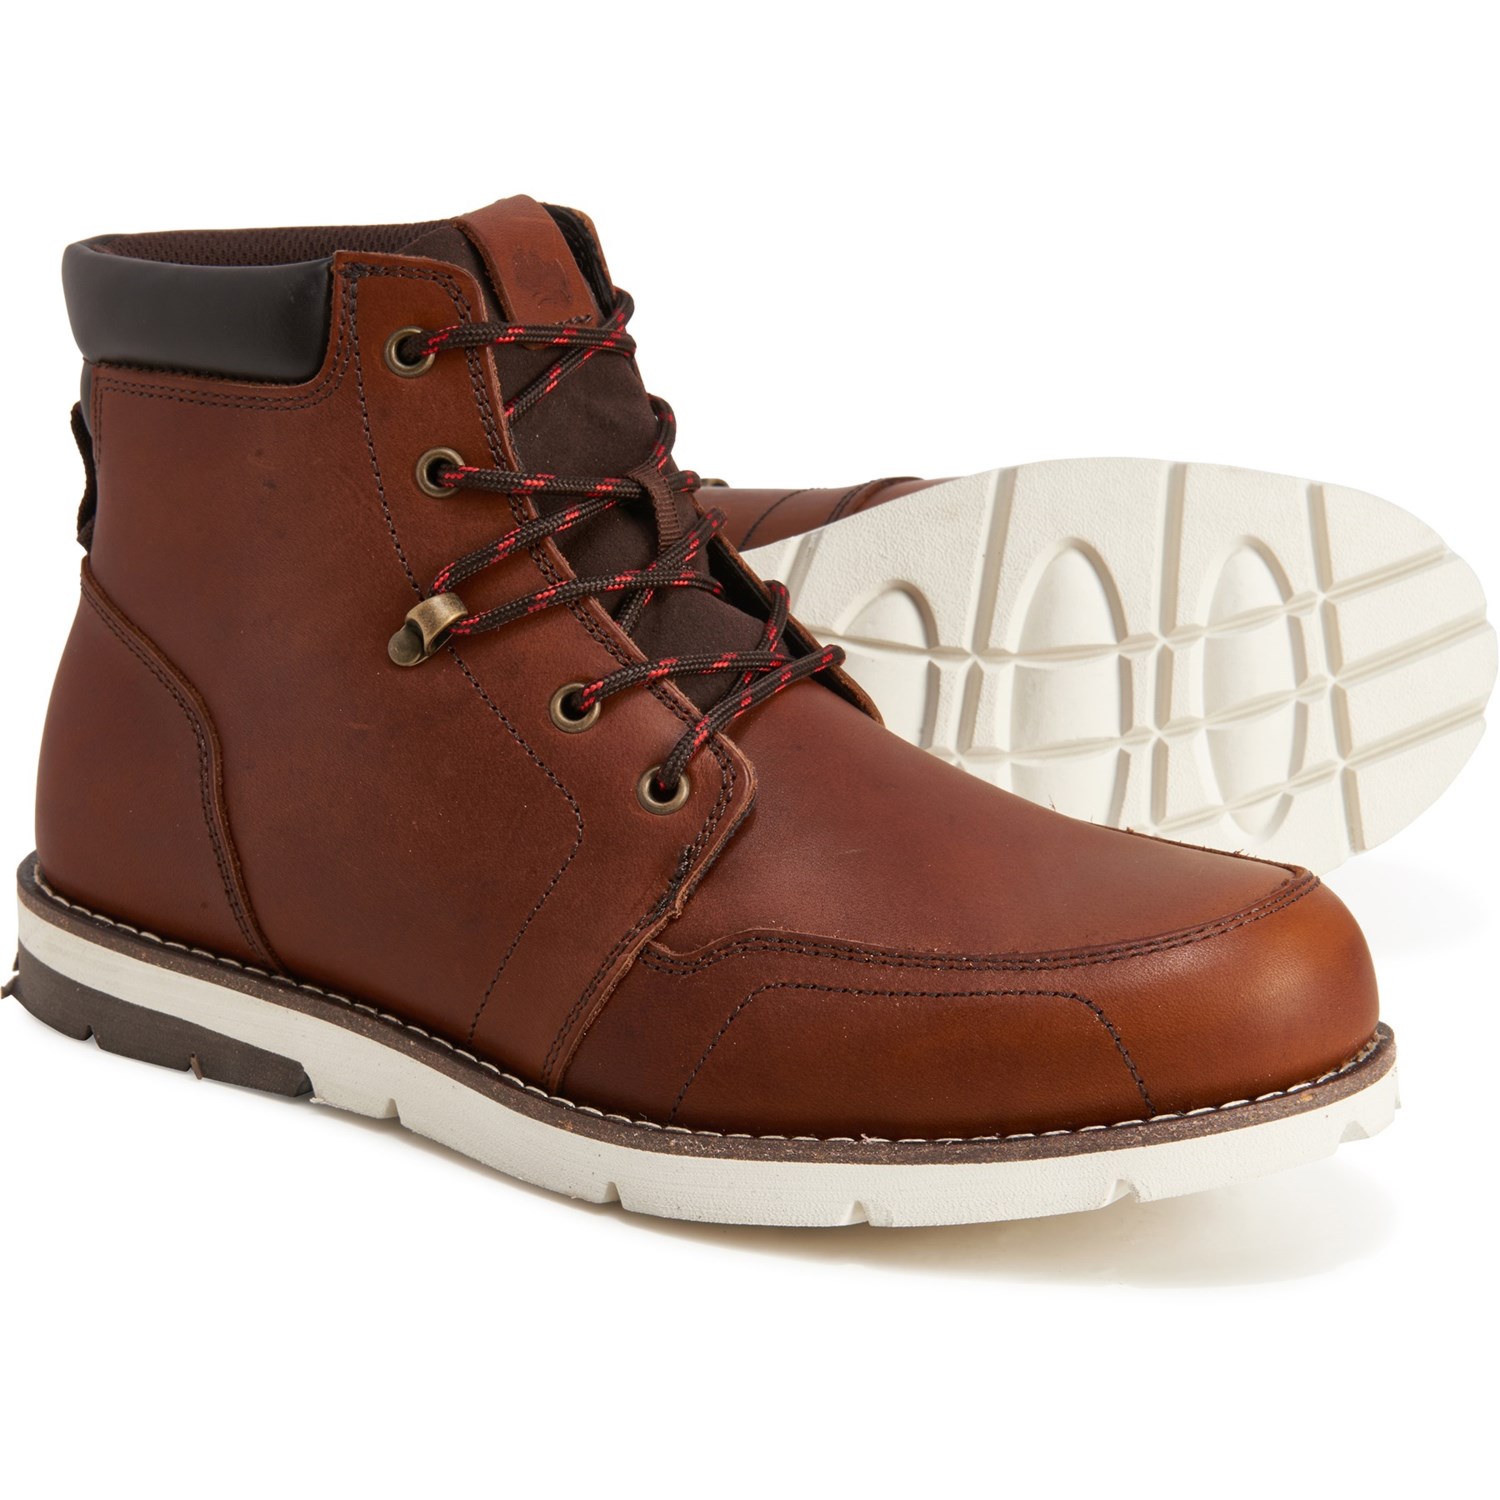 Staheekum Redwood Ankle Boots (For Men) - Save 39%